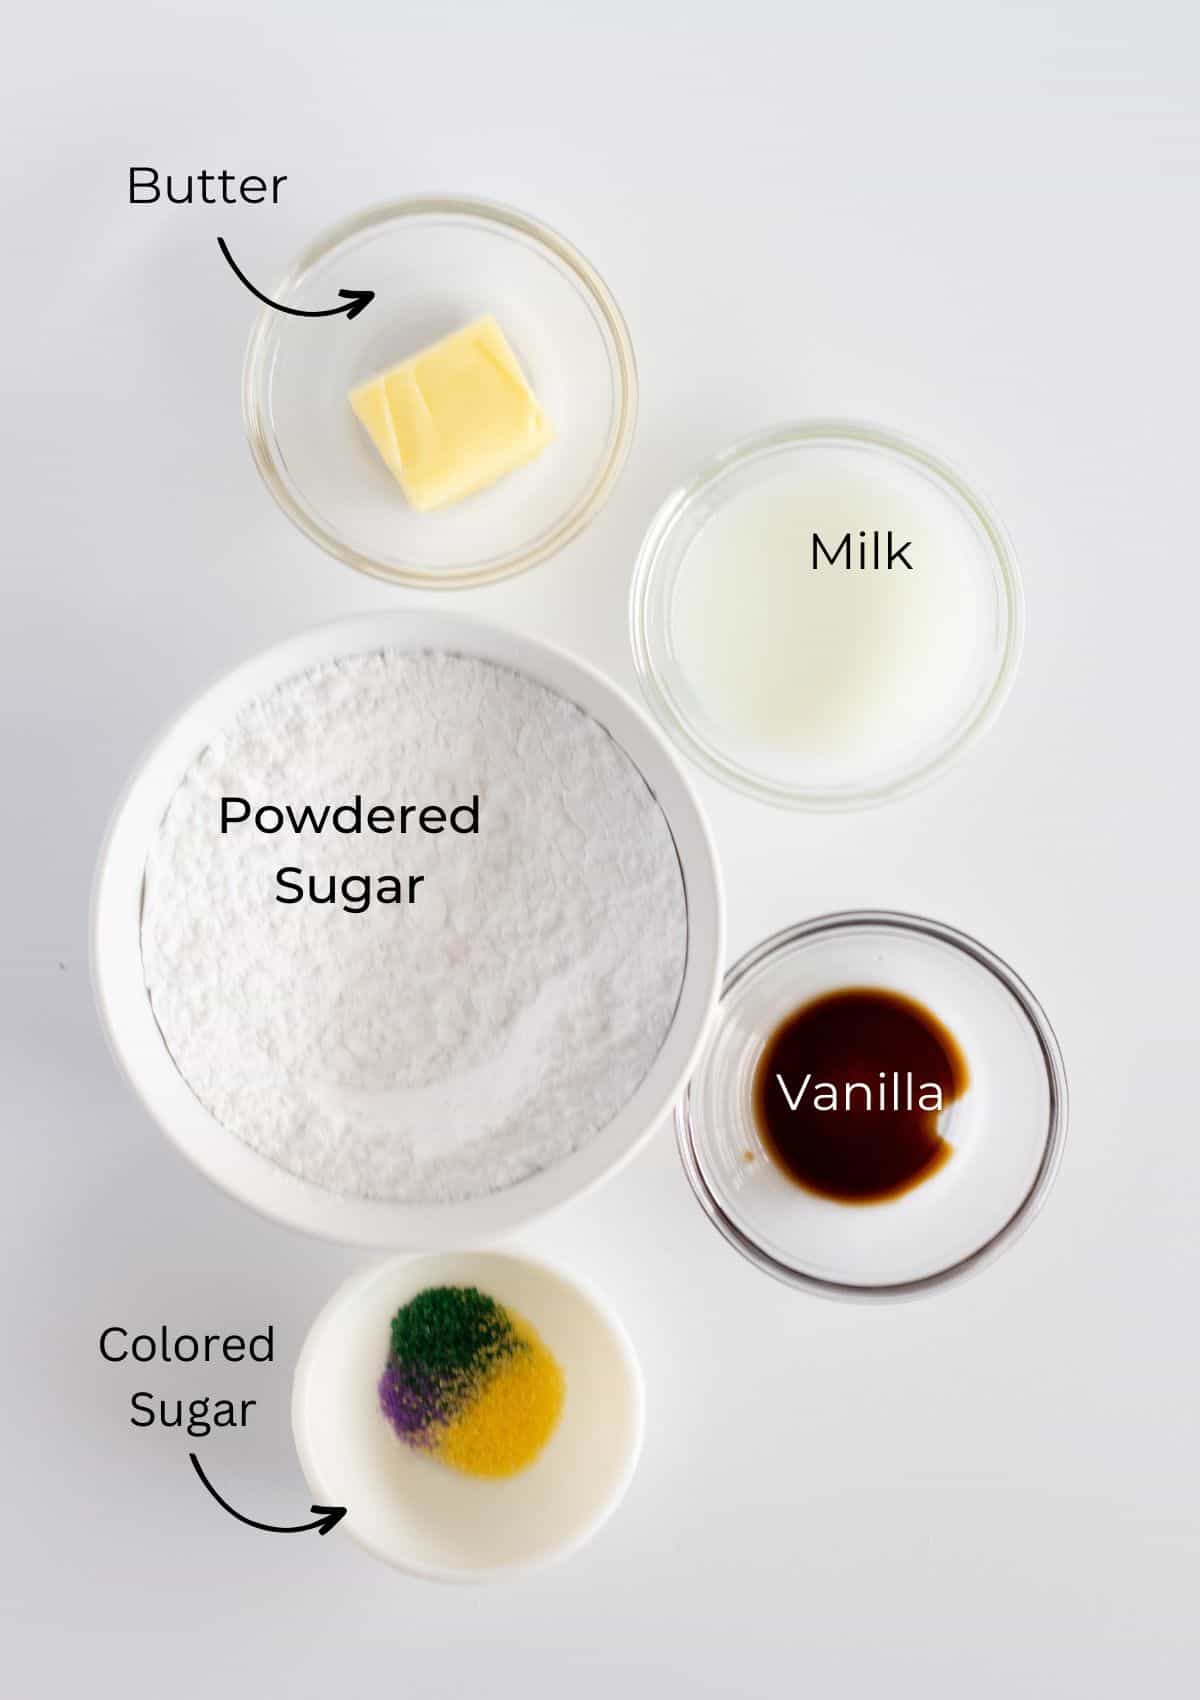 Photo of the ingredients needed for the Mardi Gras frosting and toppings.